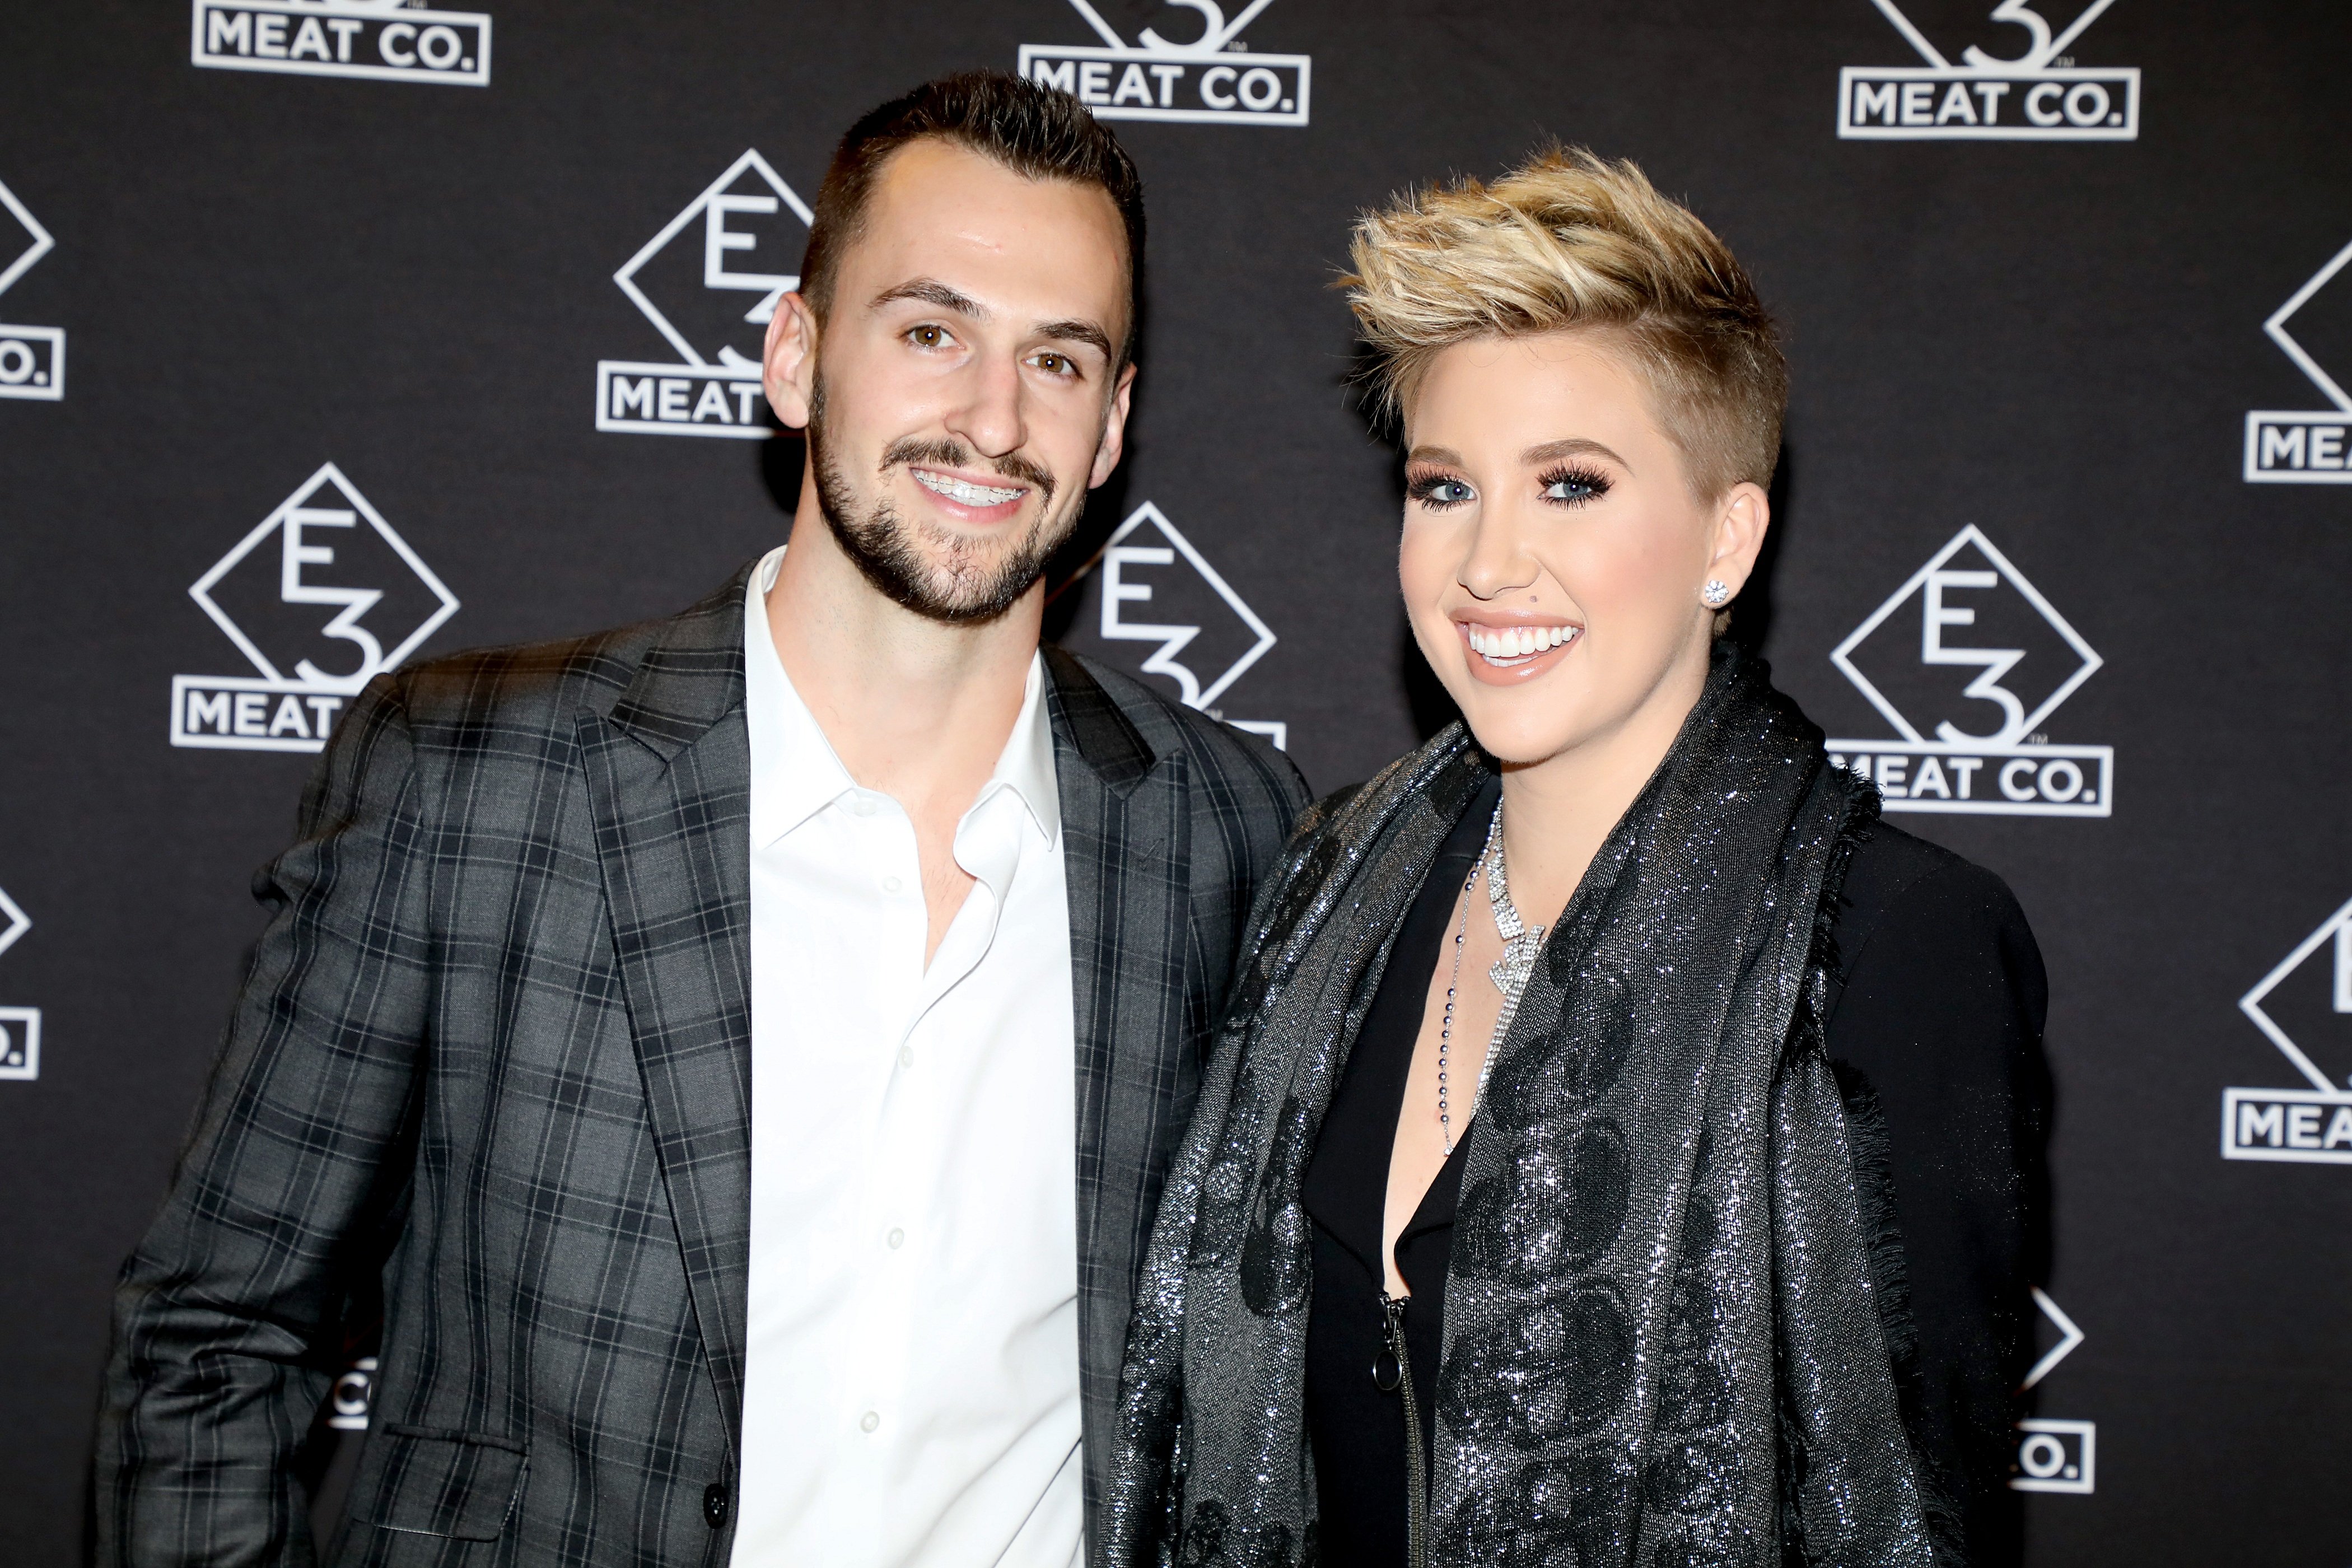 Nic Kerdiles and Savannah Chrisley attend the grand opening of E3 Chophouse Nashville on November 20, 2019. | Photo: Getty Images